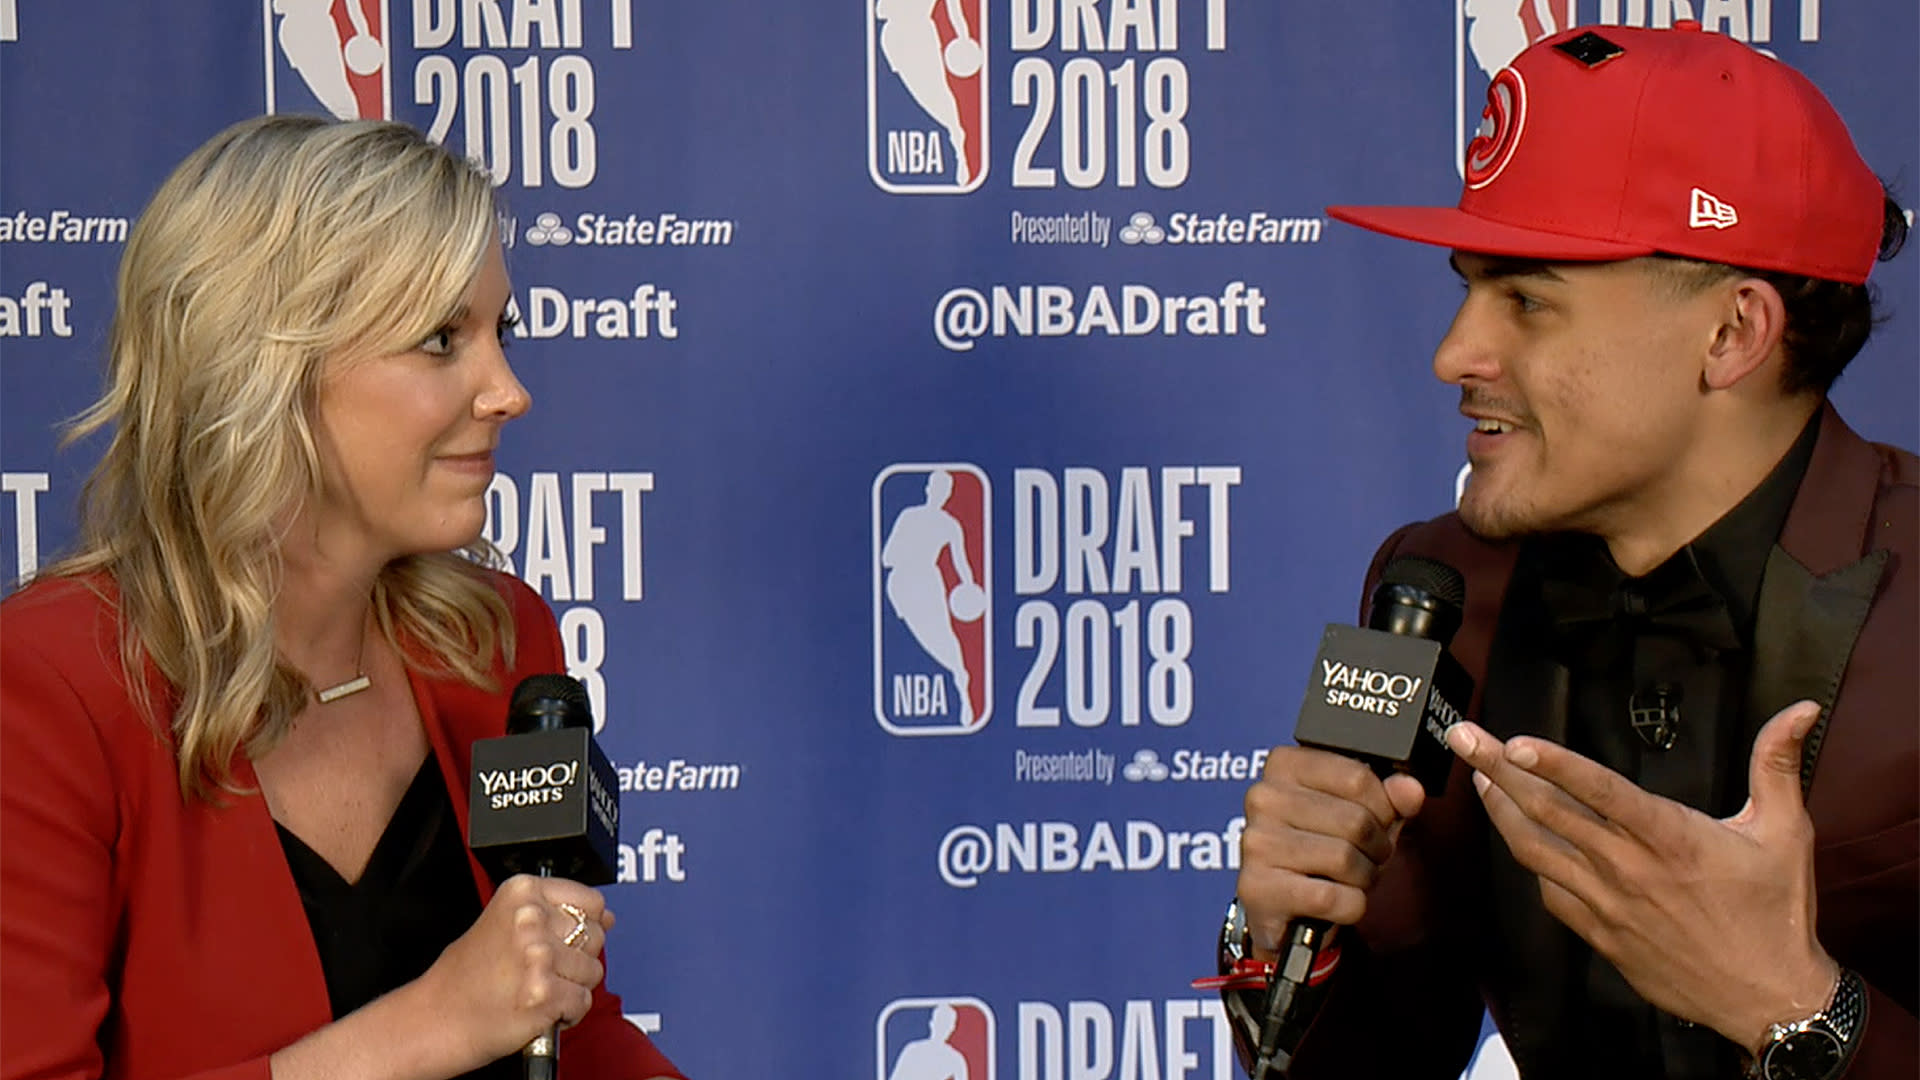 Trae Young channels LeBron James with NBA draft outfit